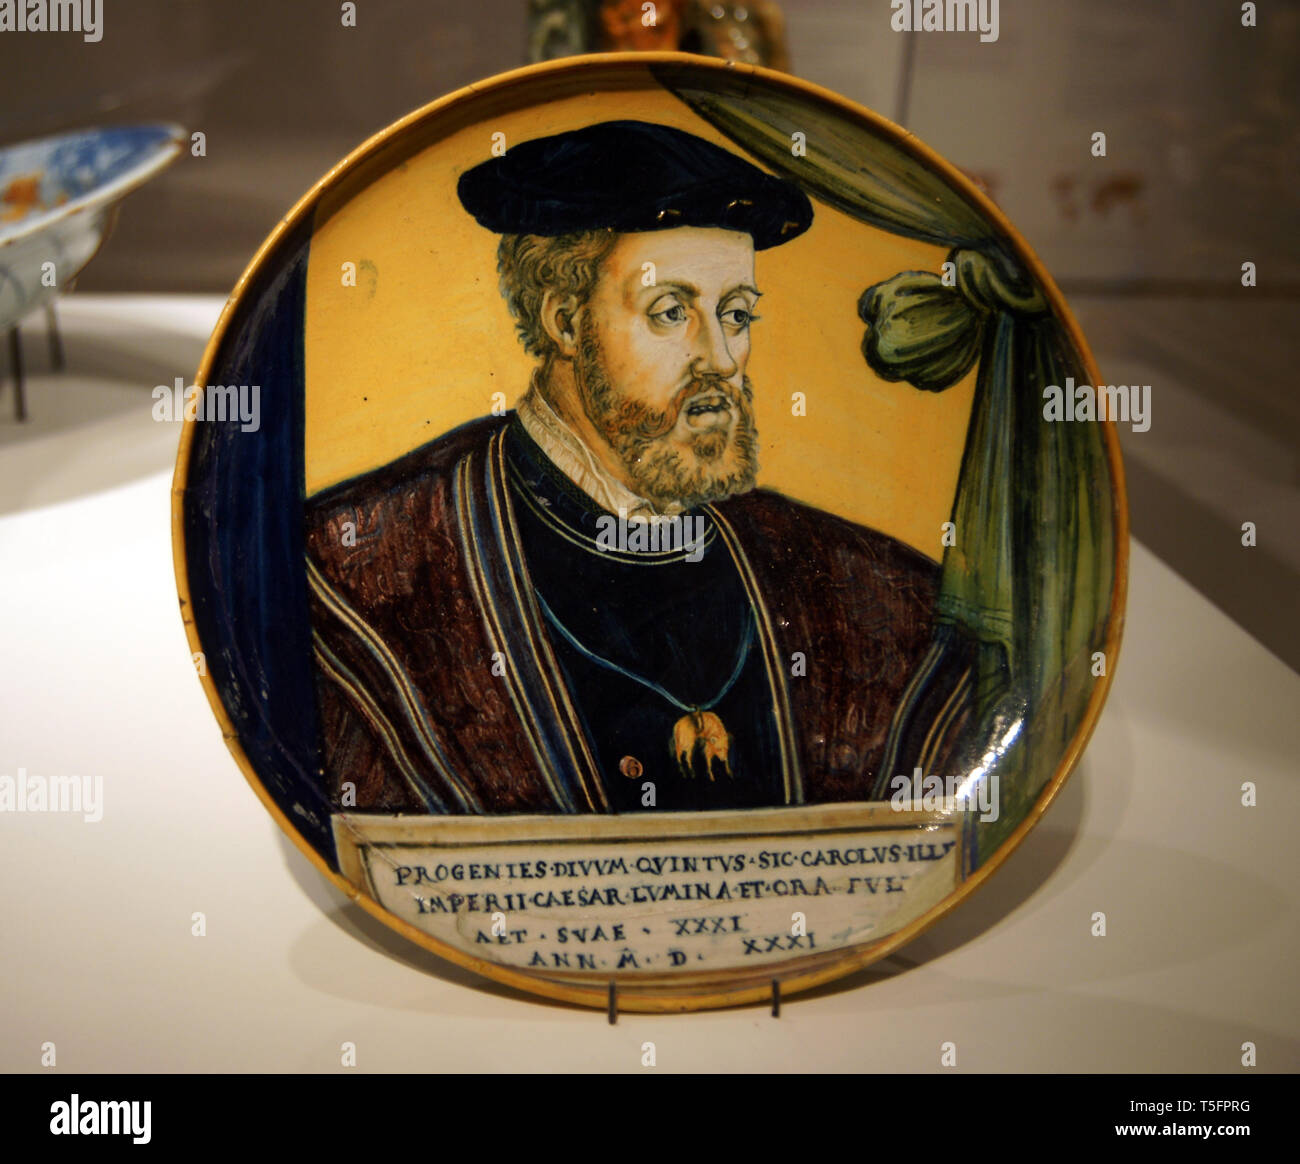 Plate: Portrait of Charles v (1500-1558). Maiolica, painted polychrome pottery, 1531. Castel Durante workshop, Italy. Hermitage museum Stock Photo